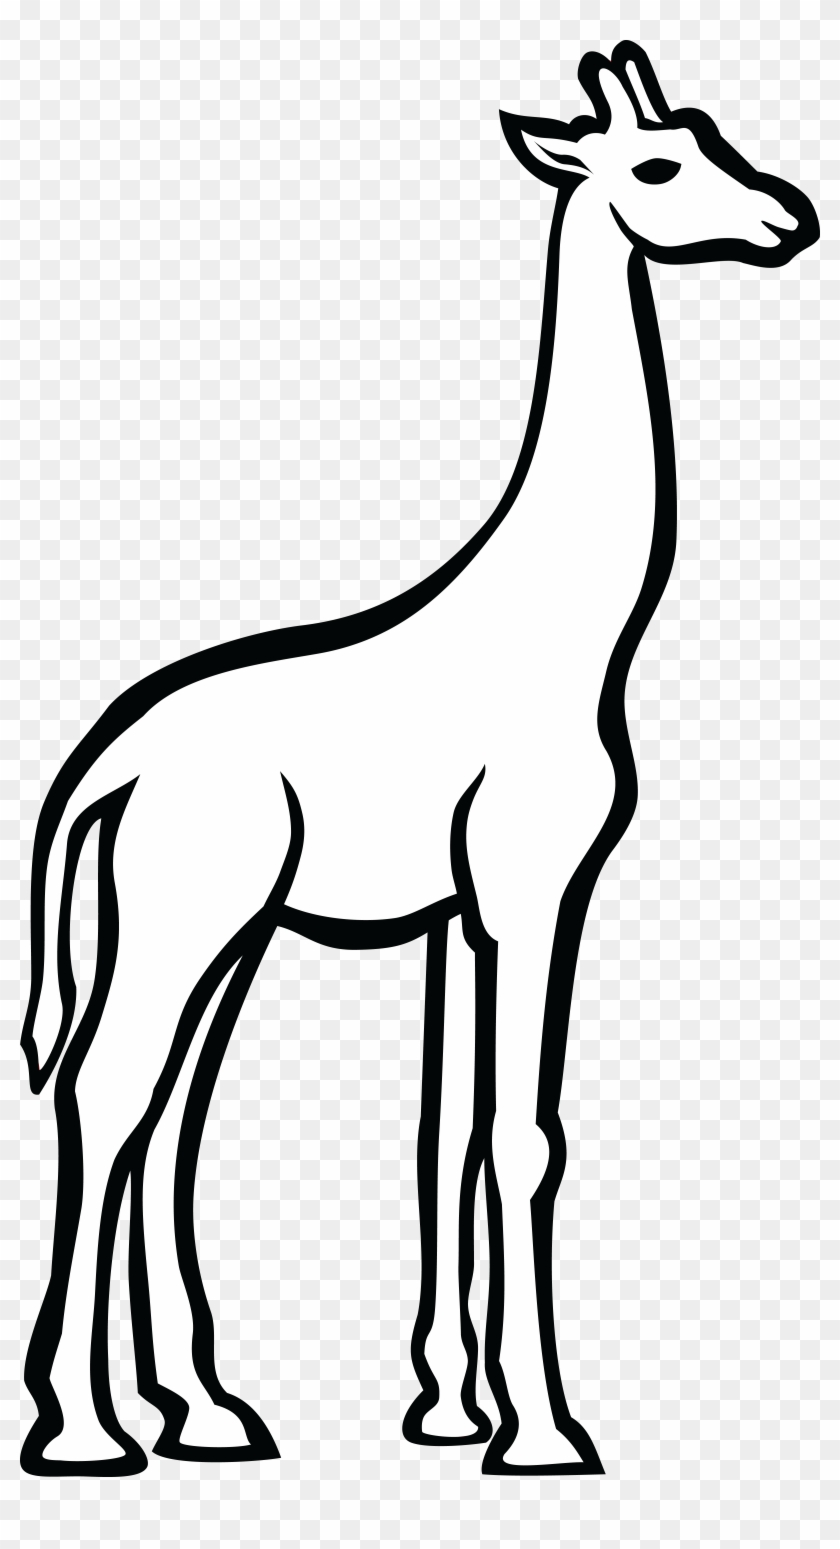 Free Clipart Of A Giraffe - Black And White Line Drawing Giraffe Png #278888